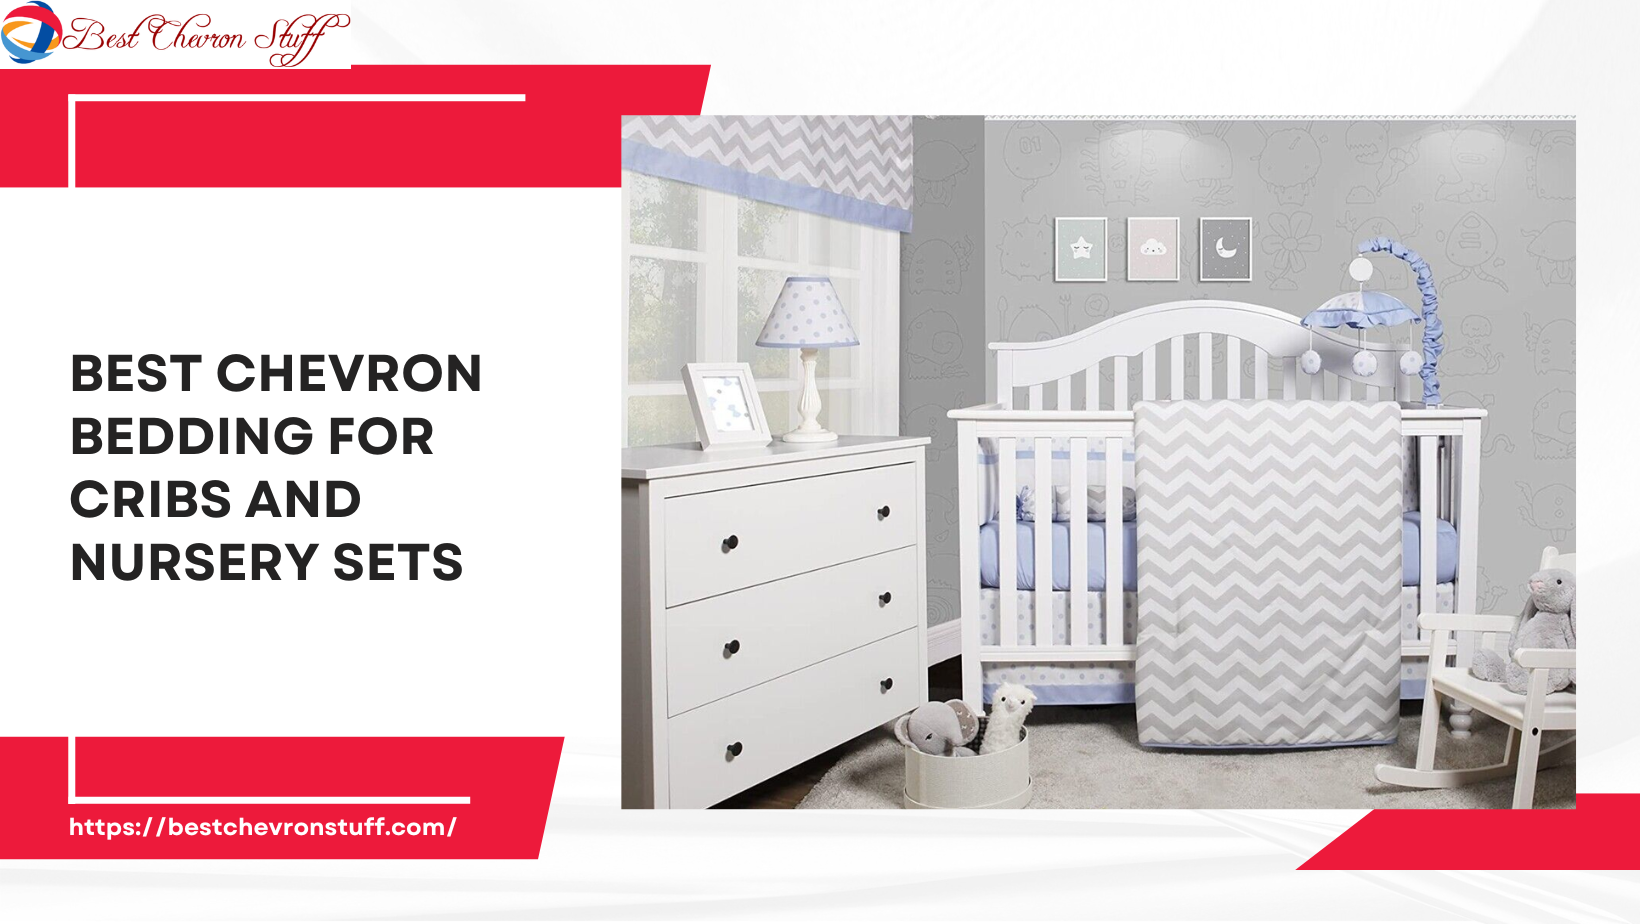 Best Chevron Bedding For Cribs and Nursery Sets